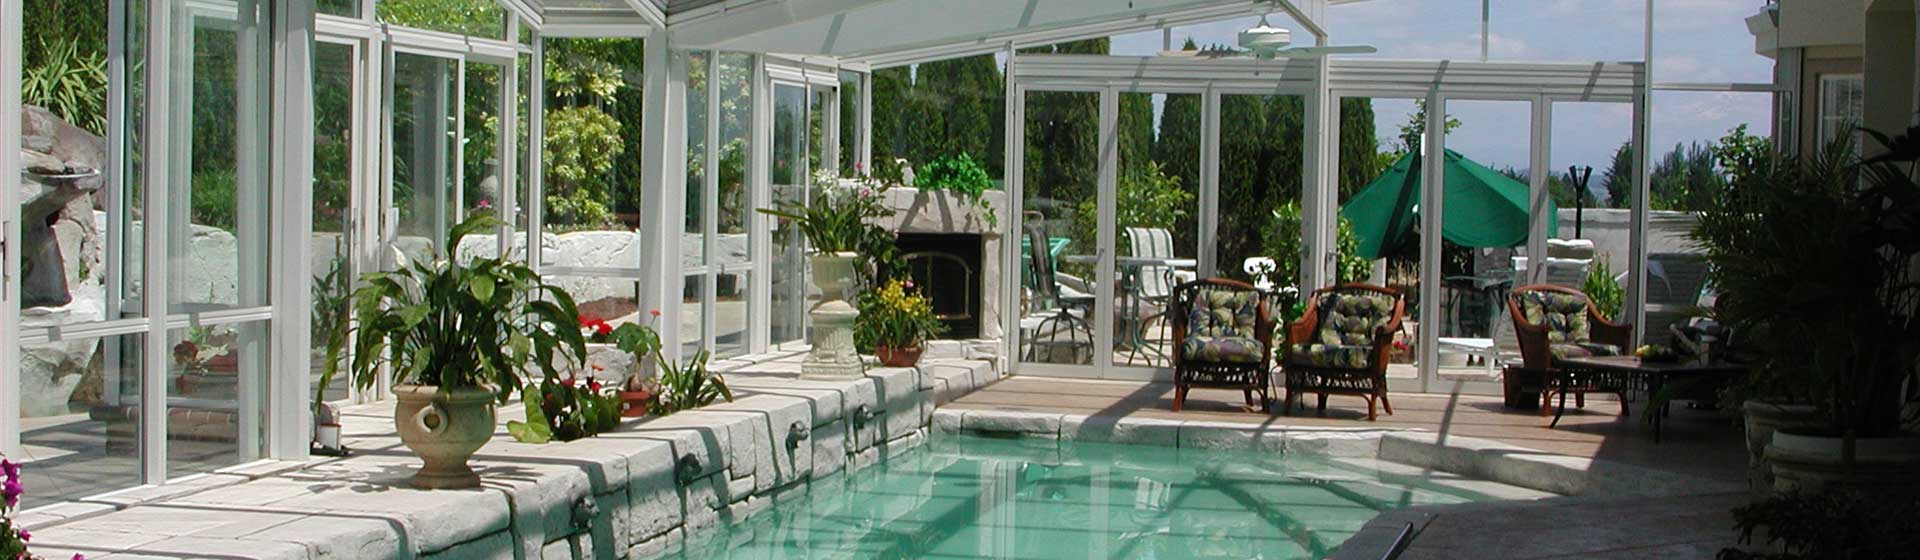 Seattle Patio Covers Sunrooms Solariums Pool Enclosures within proportions 1920 X 560